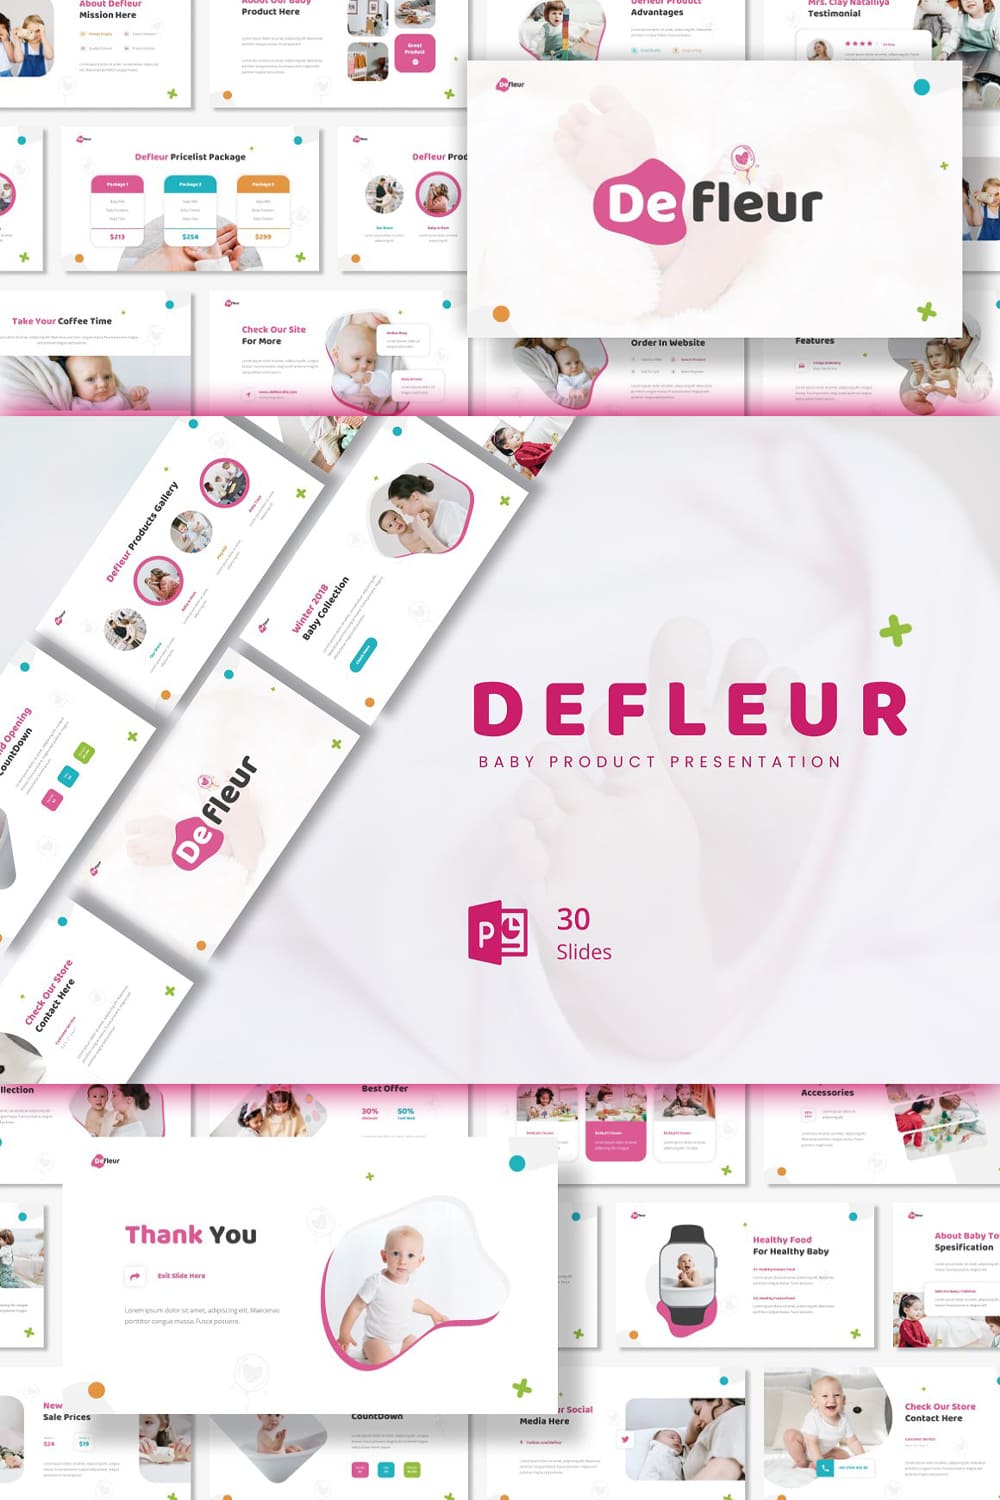 Defleur - Baby Product PowerPoint pinterest image.